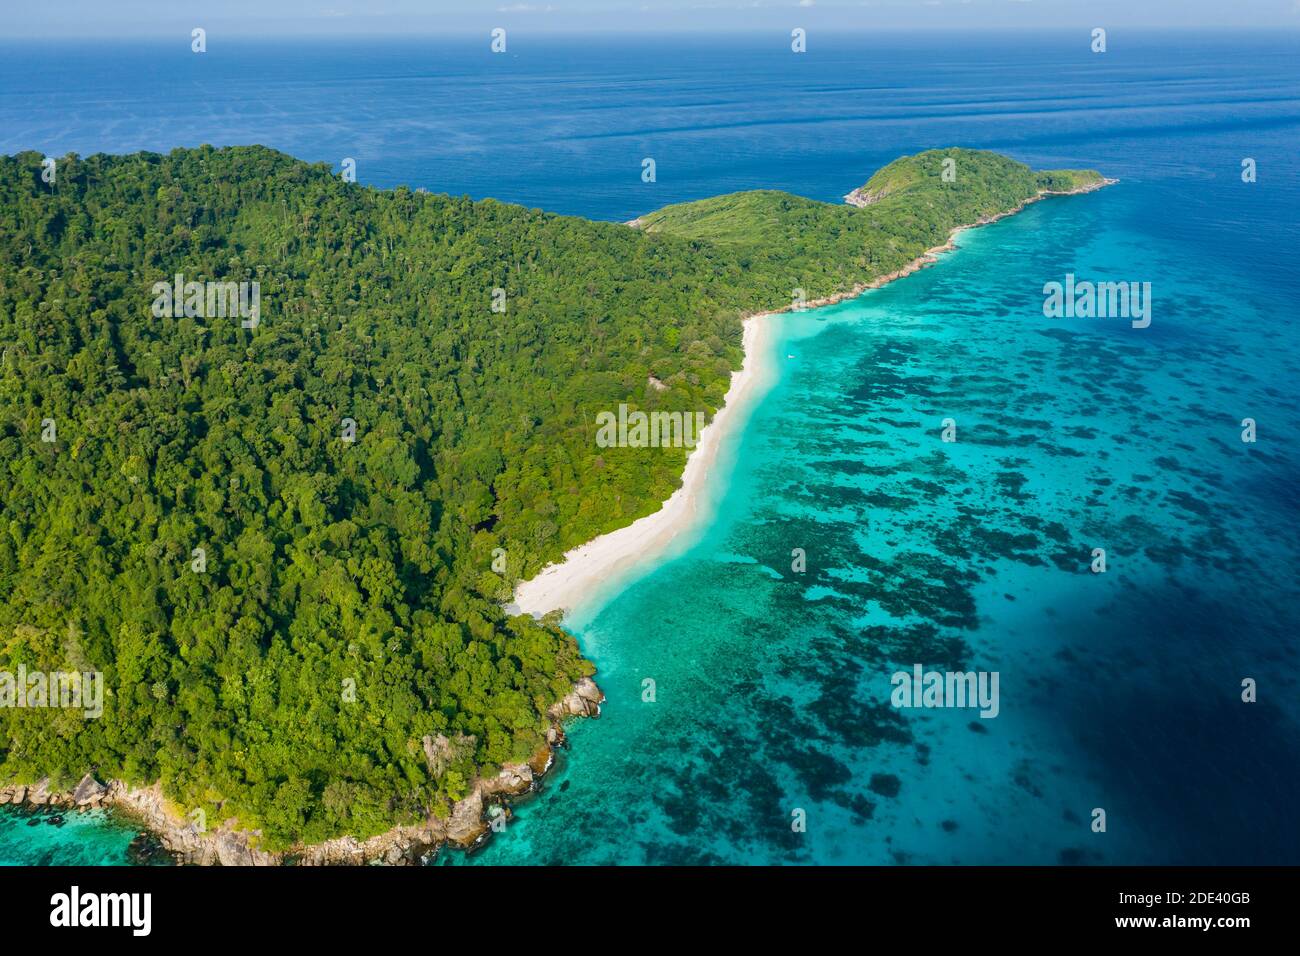 Aerial view of a deserted beach on a rugged tropical island surrounded by coral reef (Koh Tachai). Stock Photo